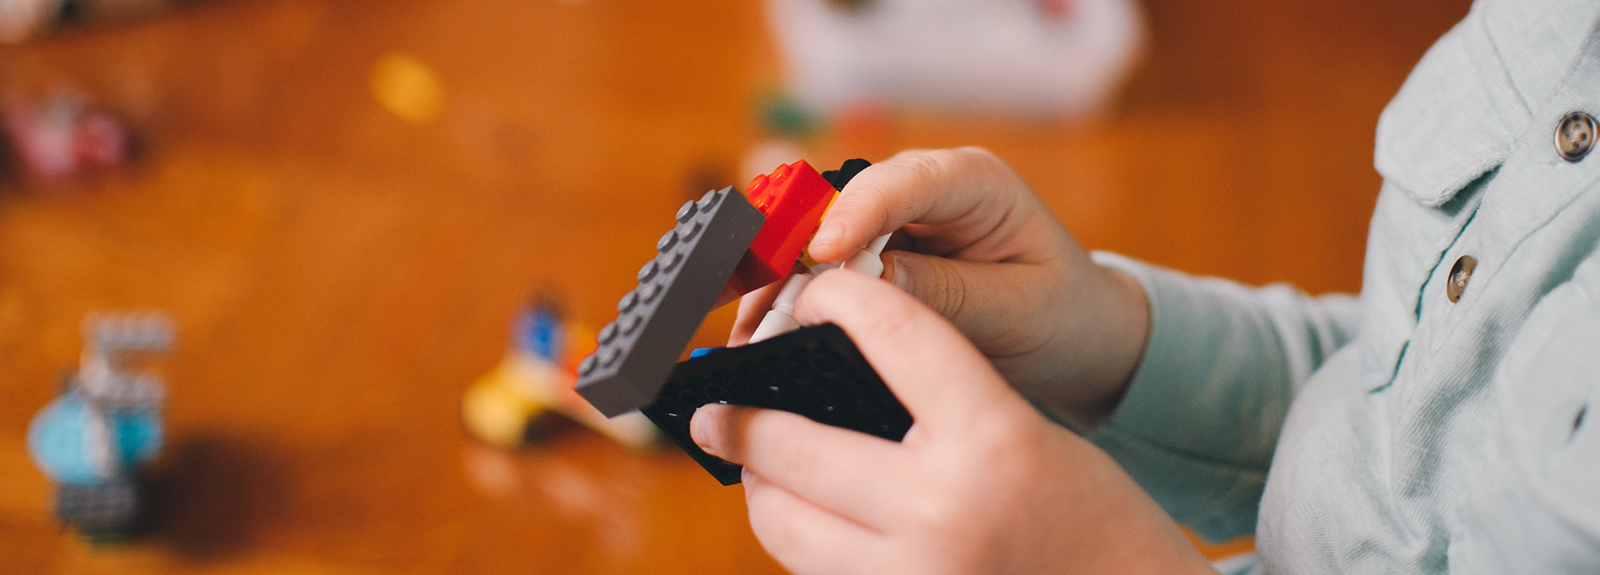 Child playing with Lego